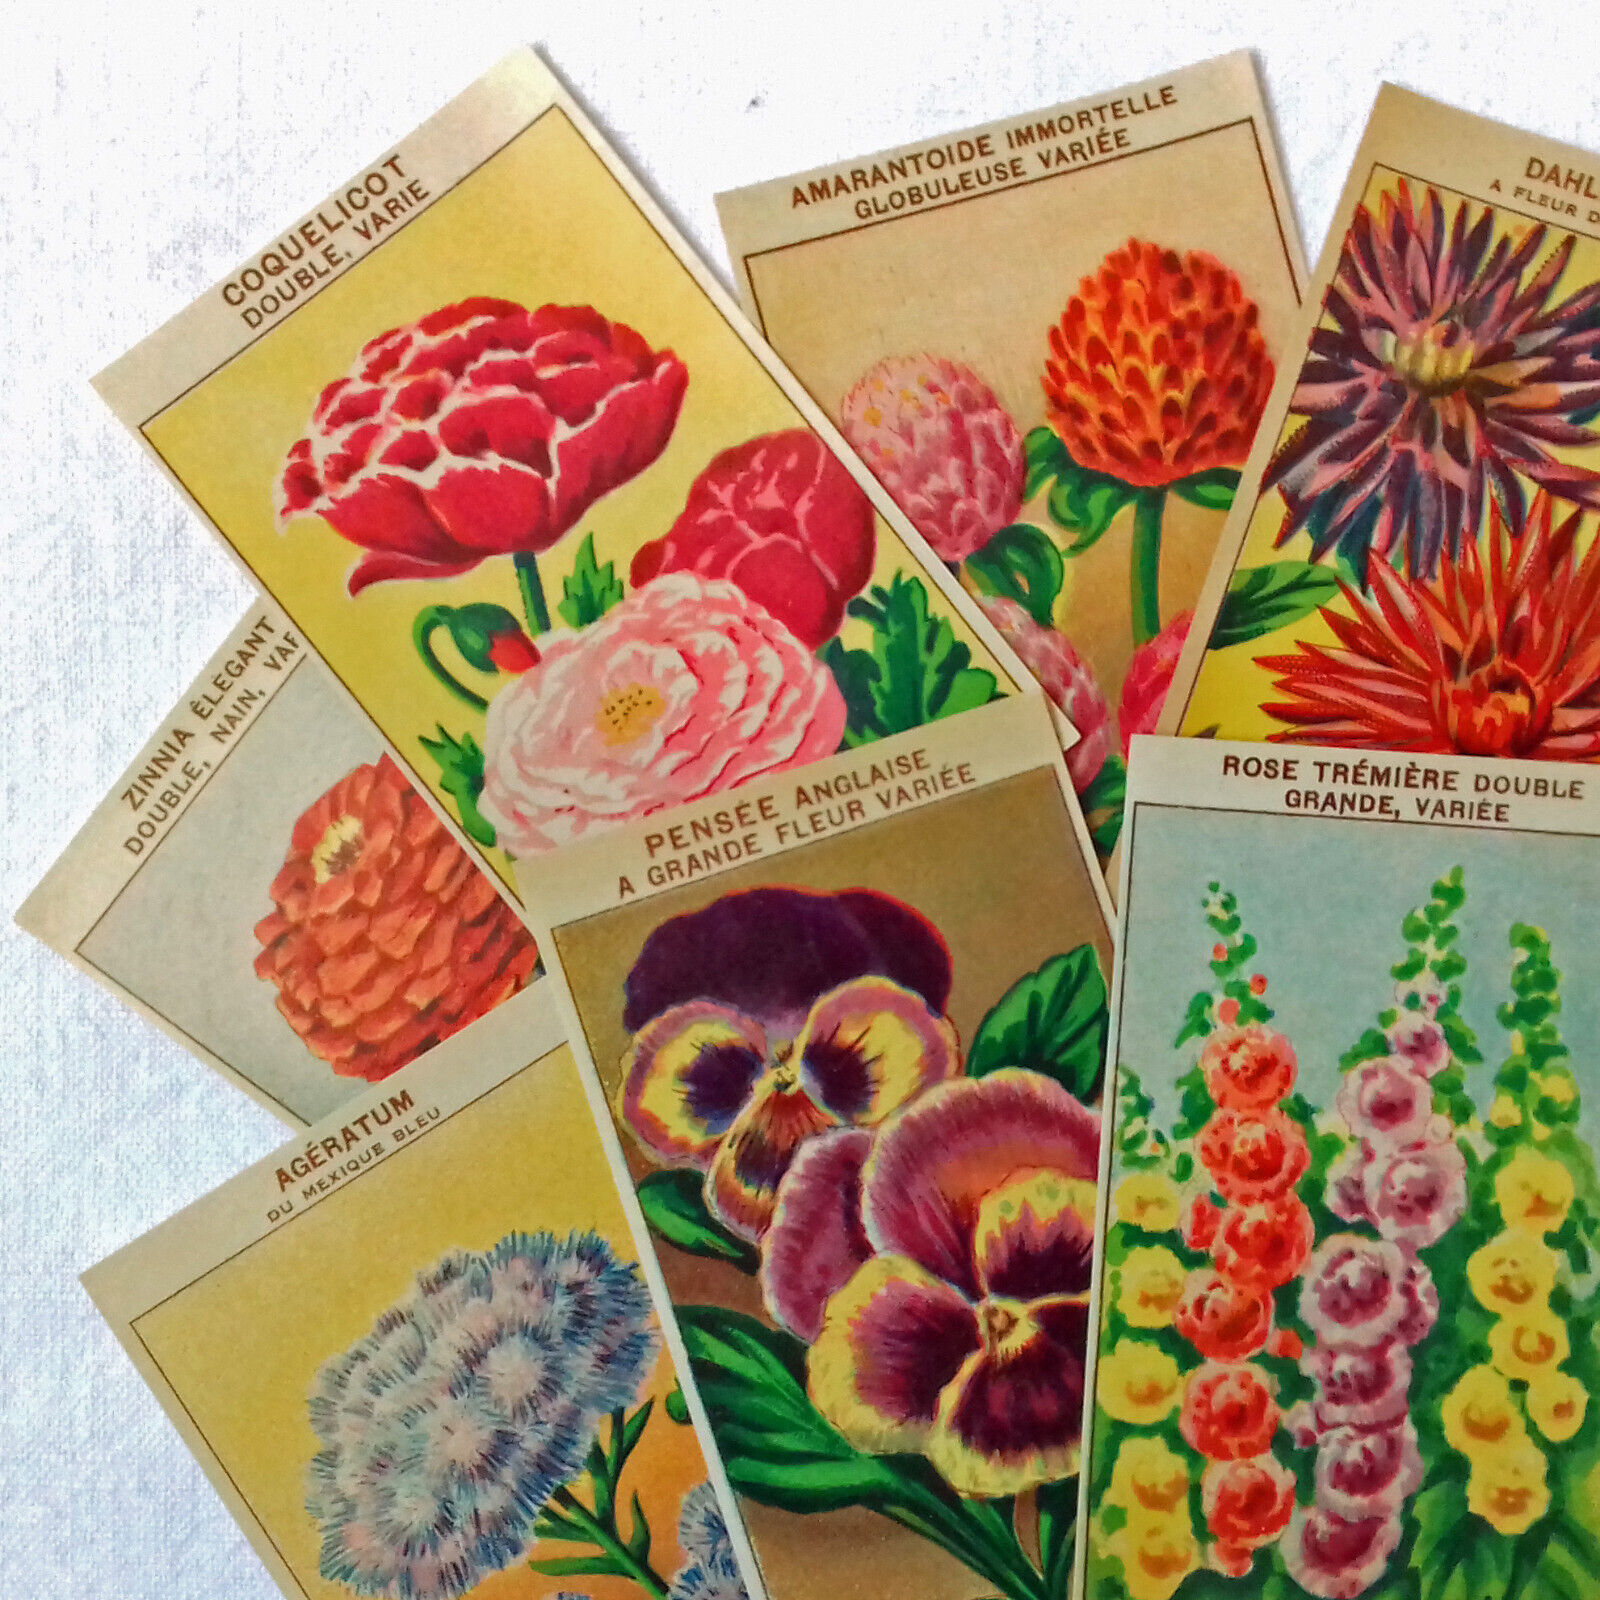 40 Vintage French Flower Seed Packet Labels original 1920's lithographs